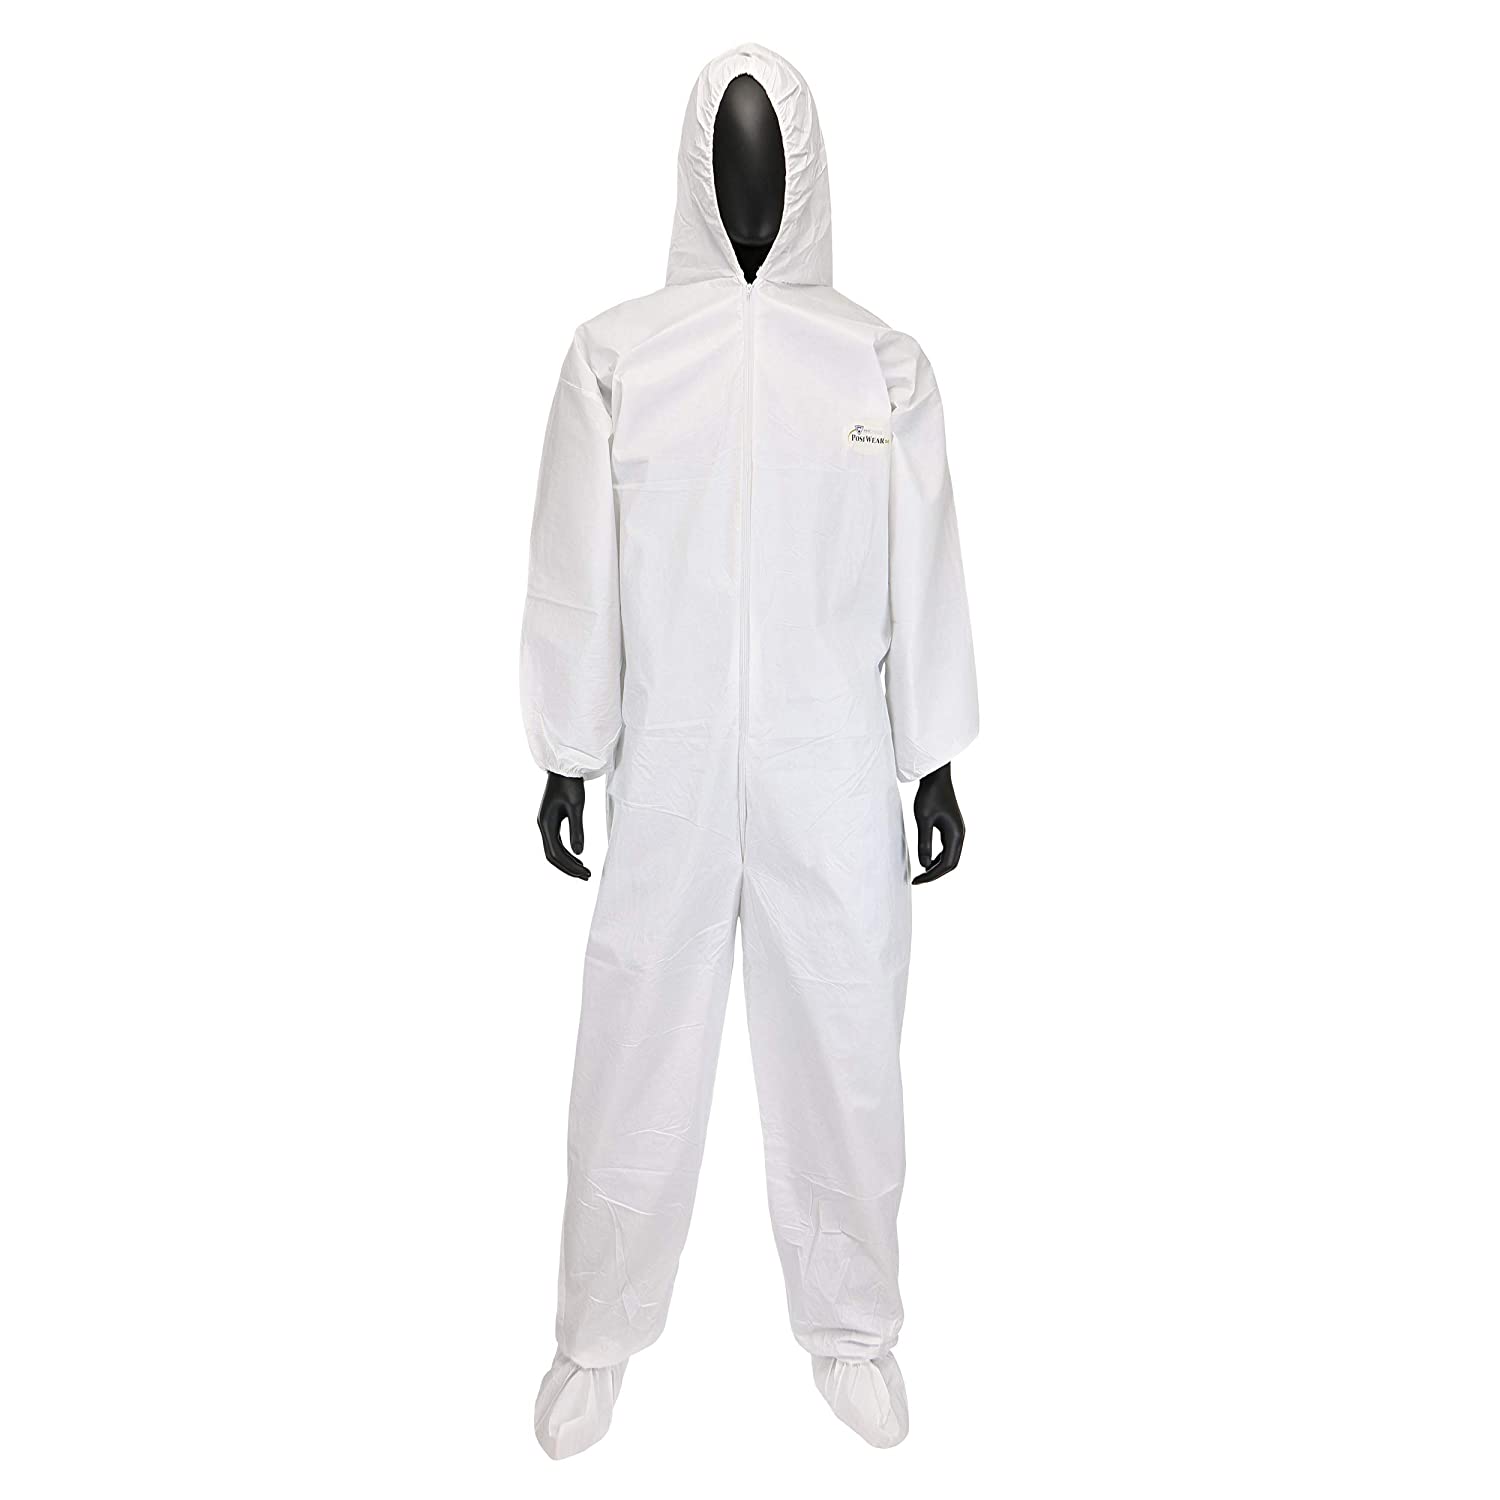 West Chester 3606 XL Polypropylene Posiba Coverall Hood, EL.Wrist and Ankle, XL, White